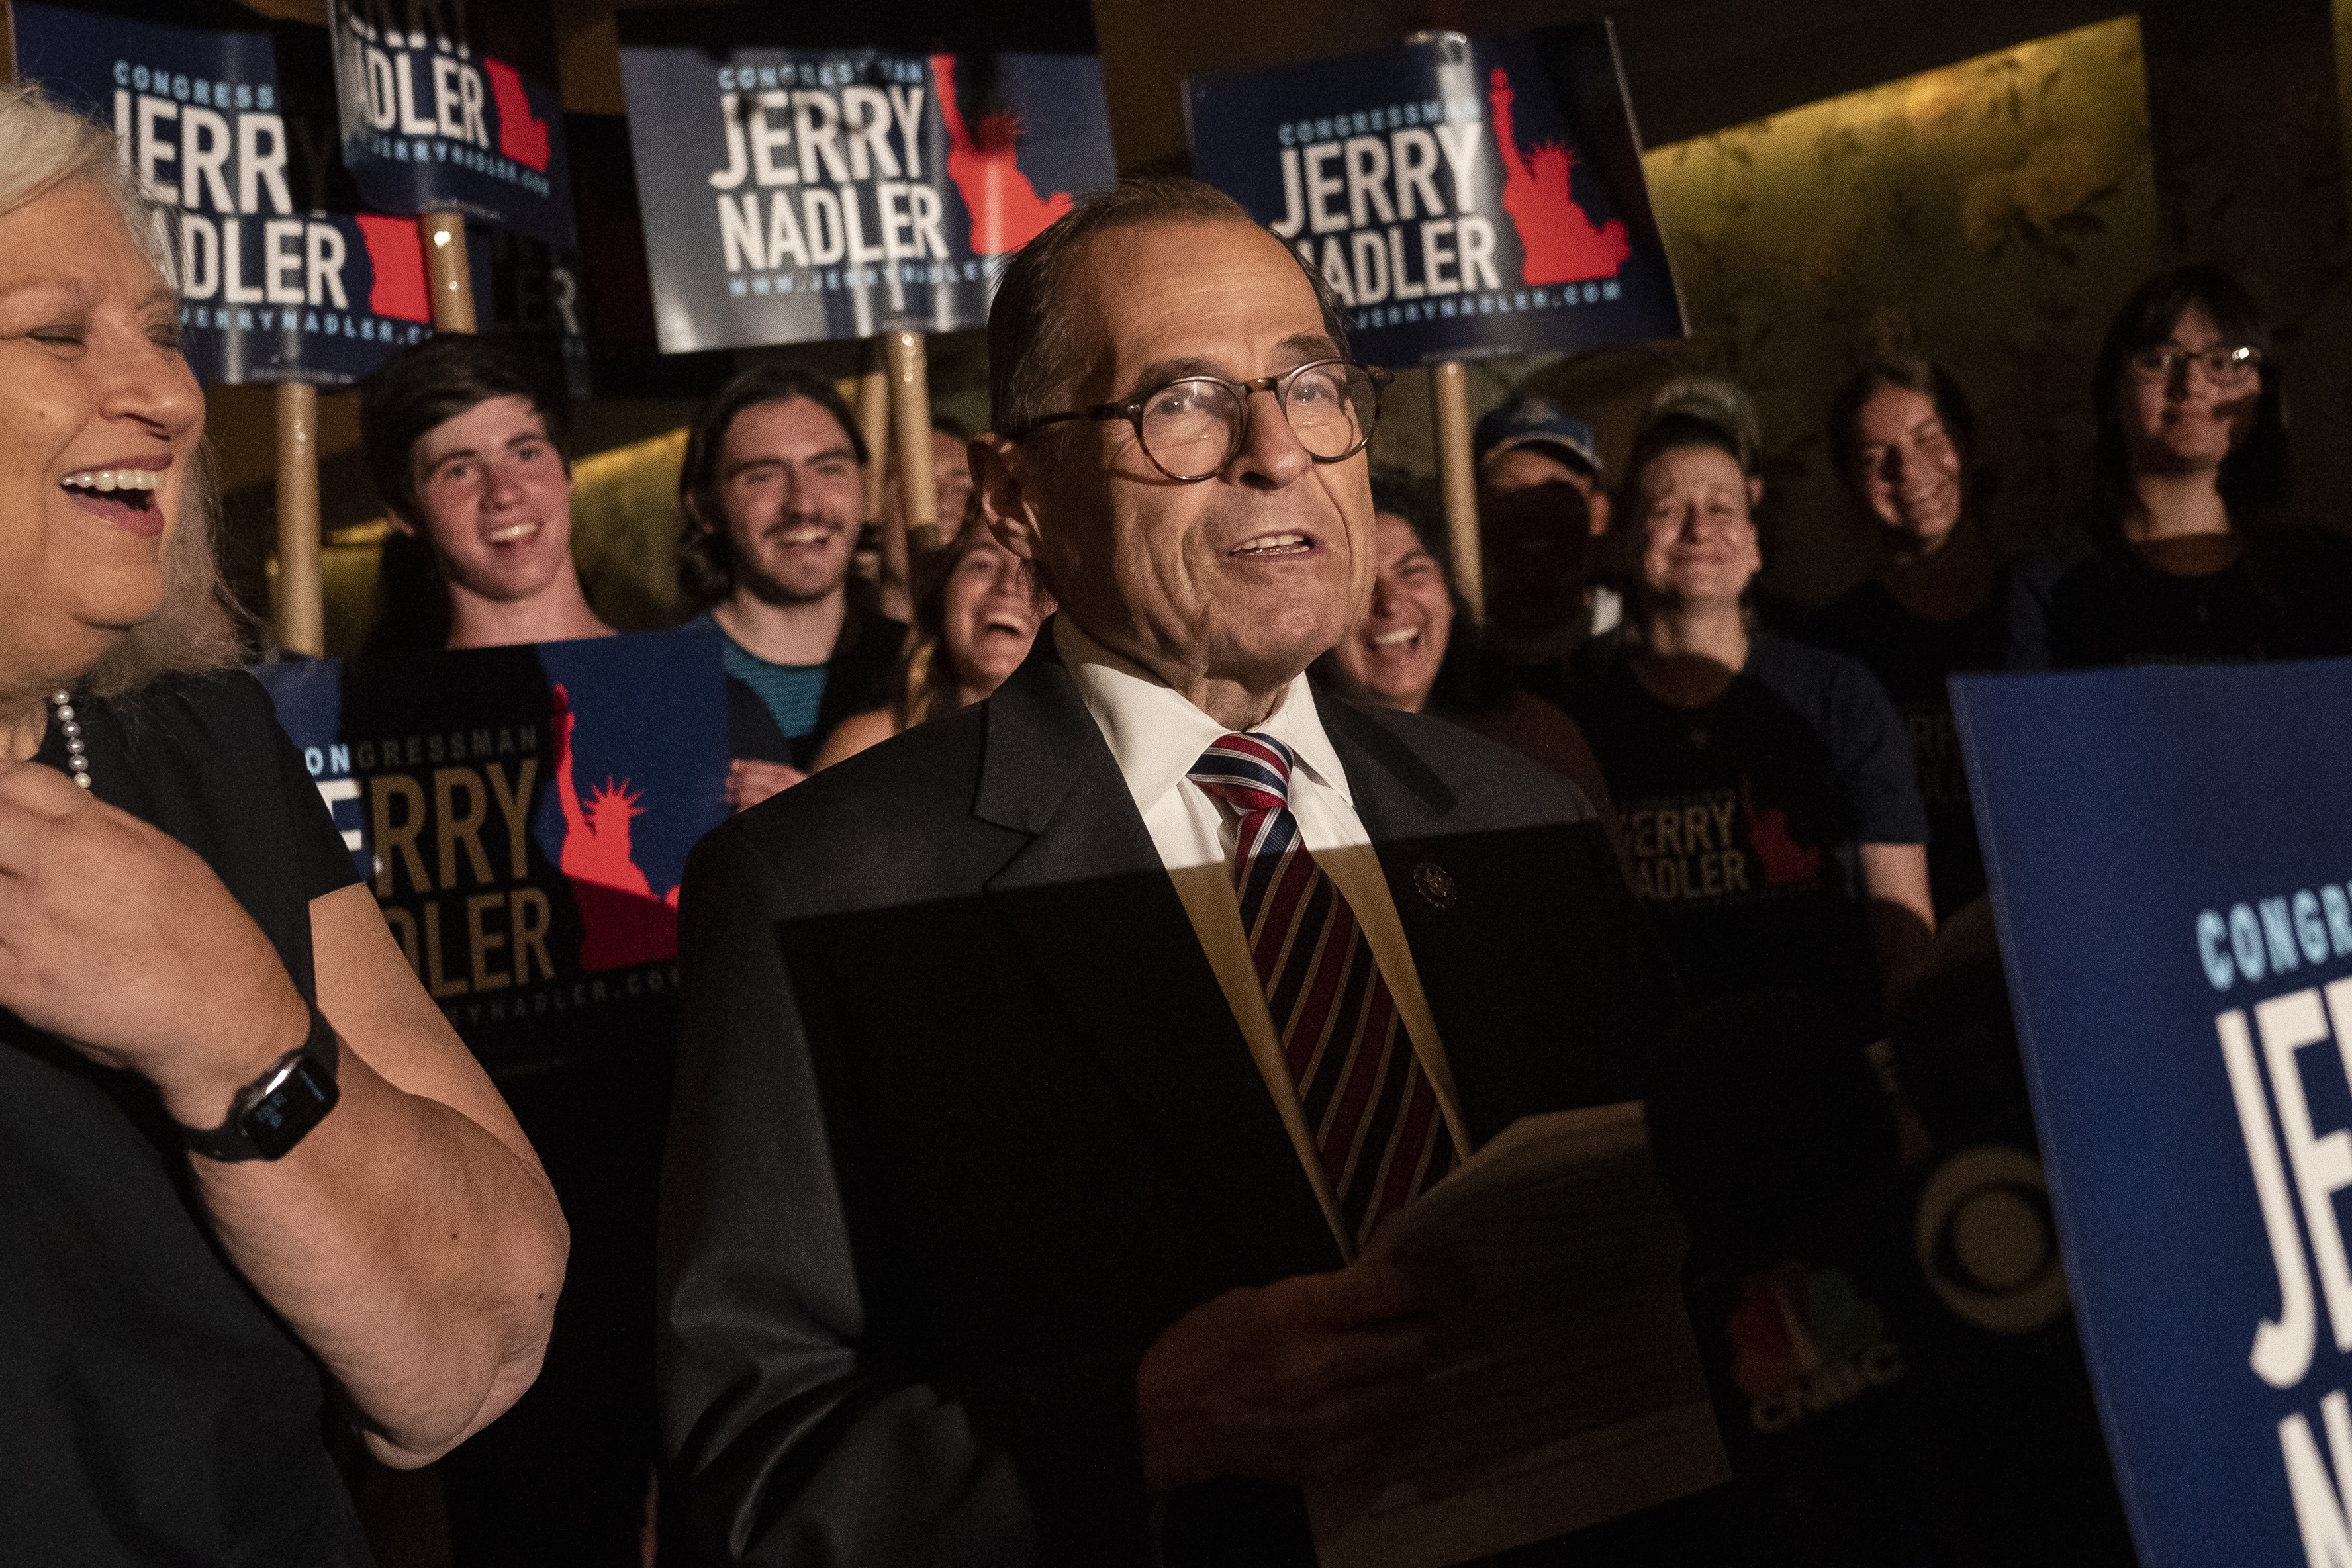 Nadler Defeats Maloney in Battle of Top House Democrats